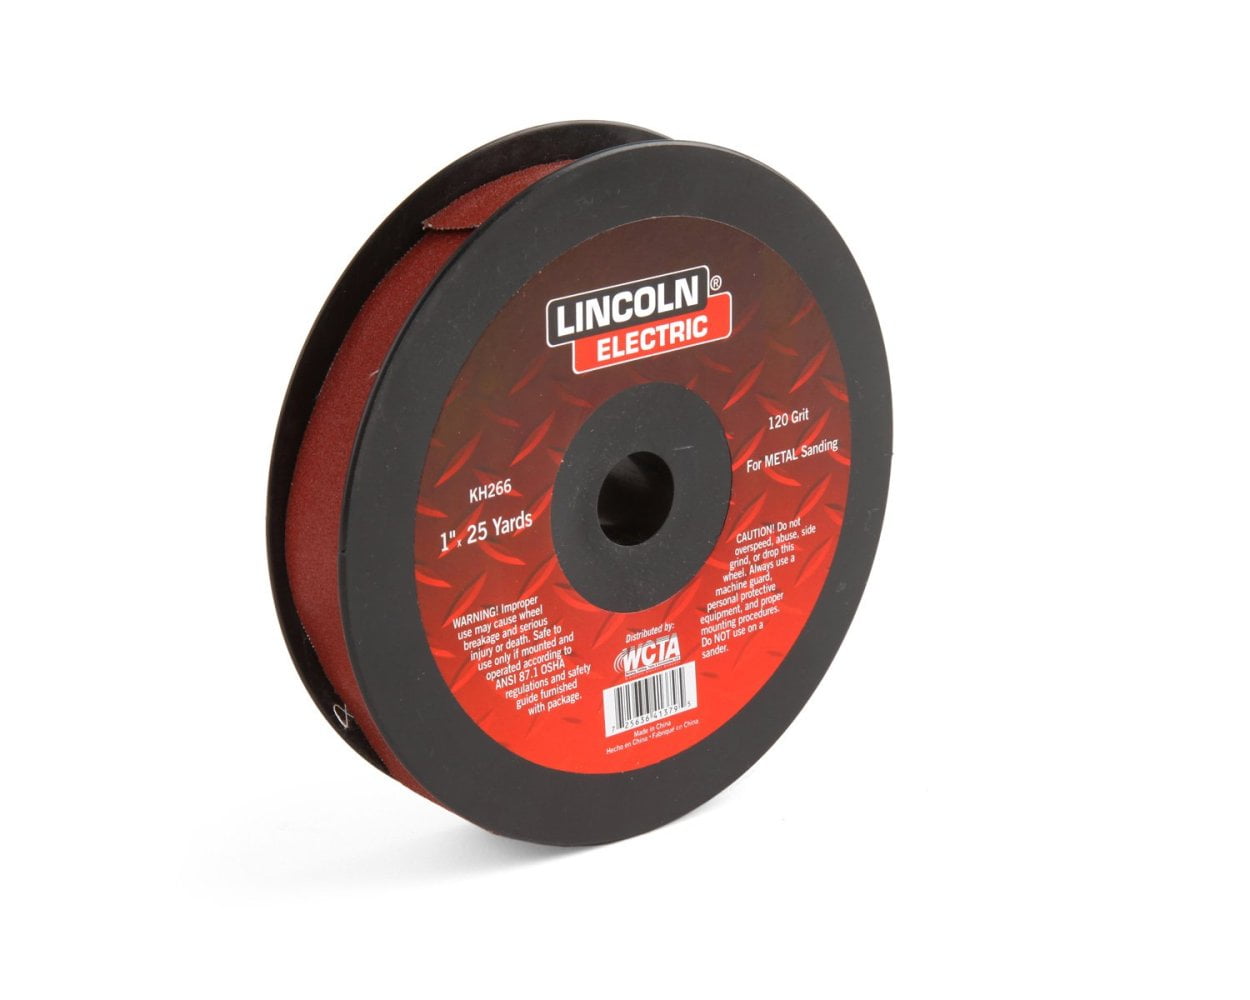 Lincoln Electric KH266 Abrasive Roll 1" x 25 yds Emery Cloth 320 Grit 